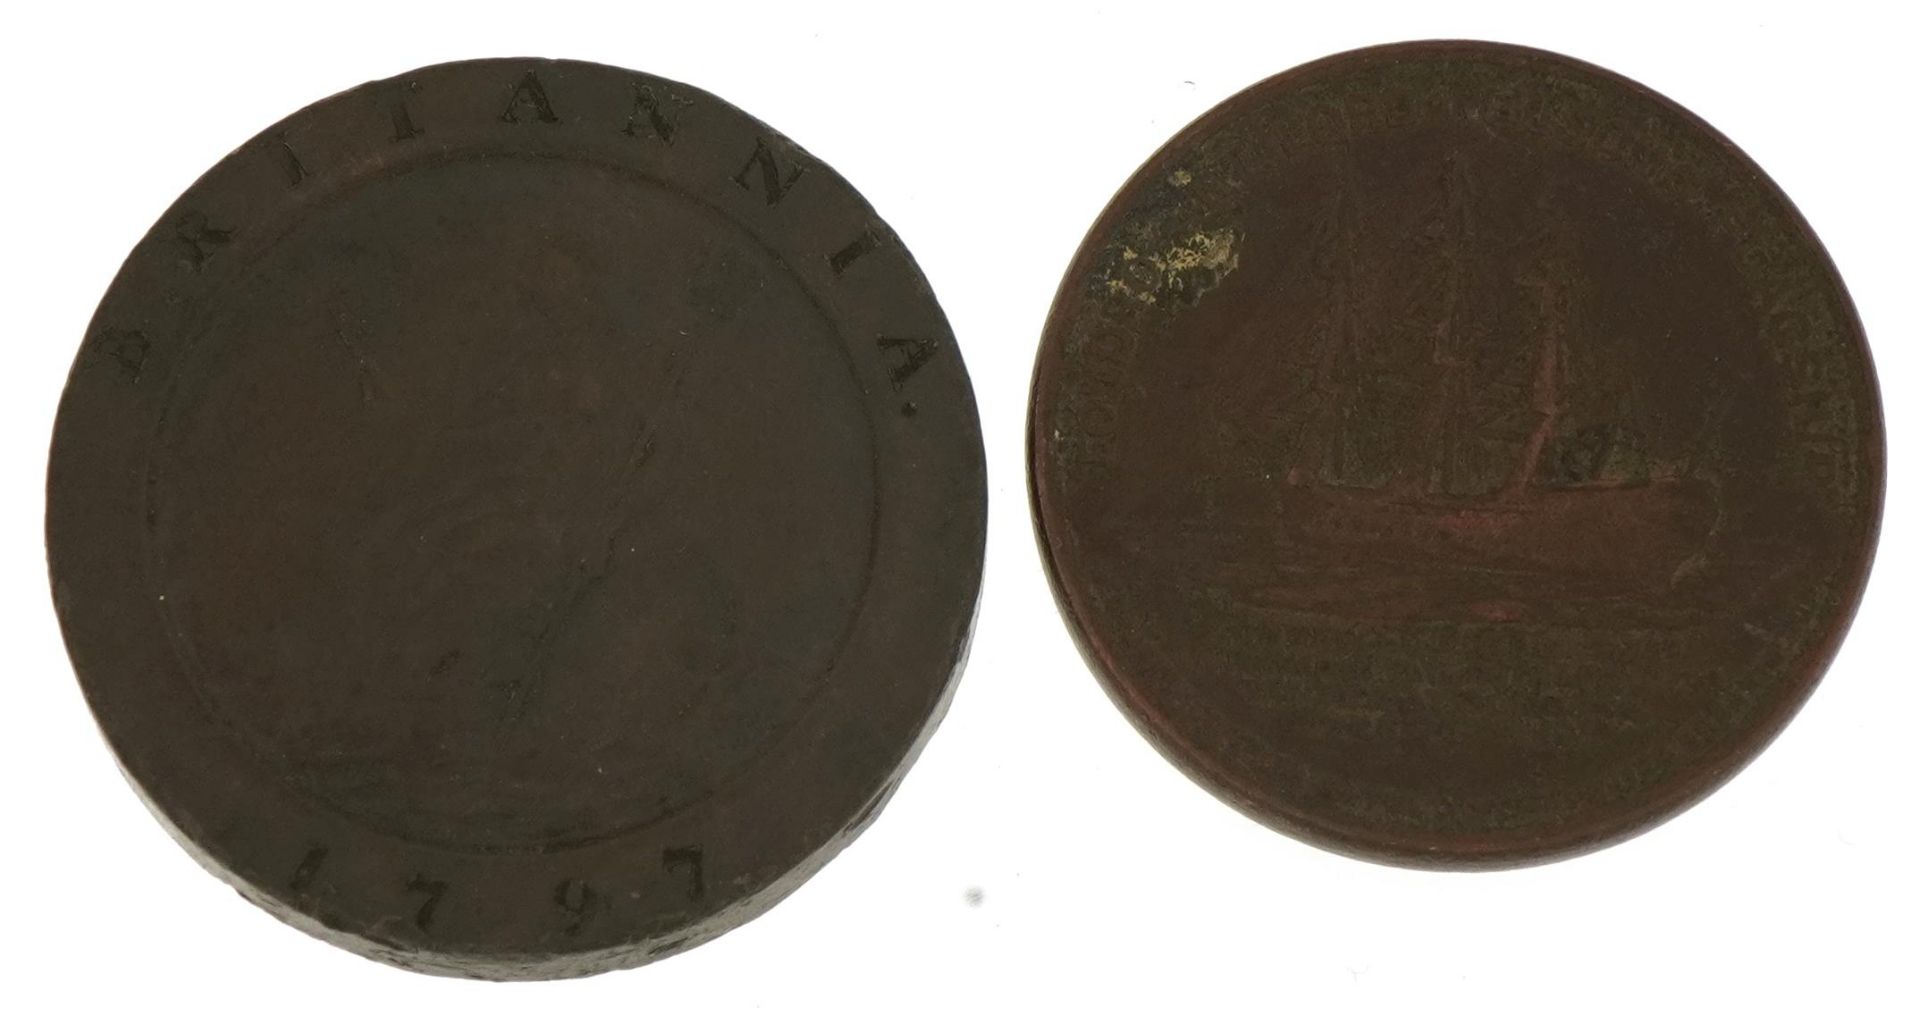 George III 1797 Cartwheel penny and a medal relating to Horatio Nelson commemorating HMS - Image 3 of 3